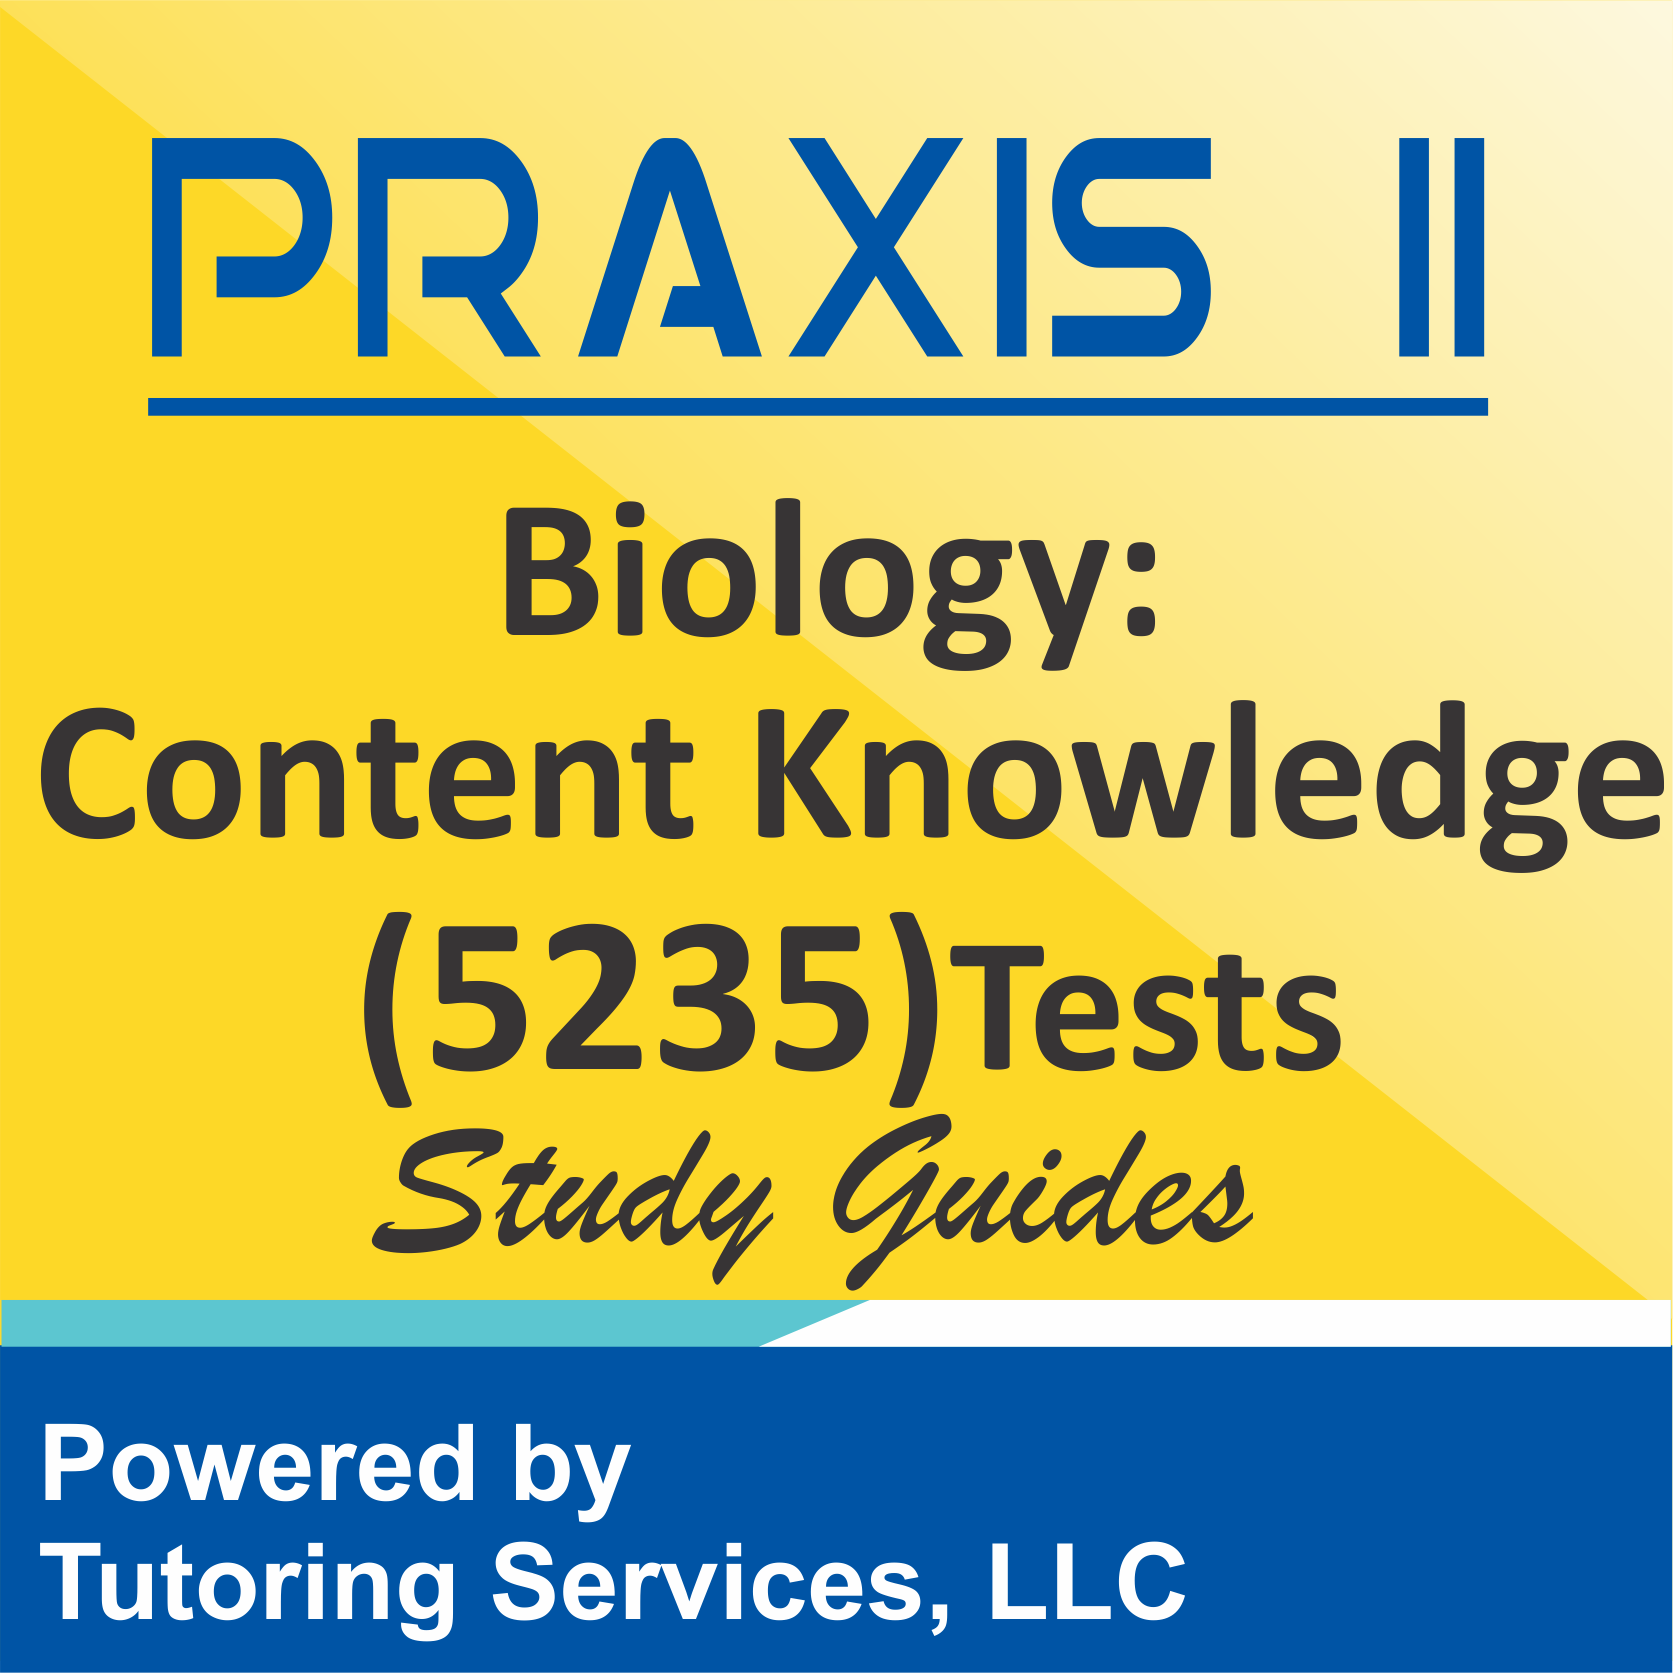 Praxis II Biology: Content Knowledge (5235) Examination Format